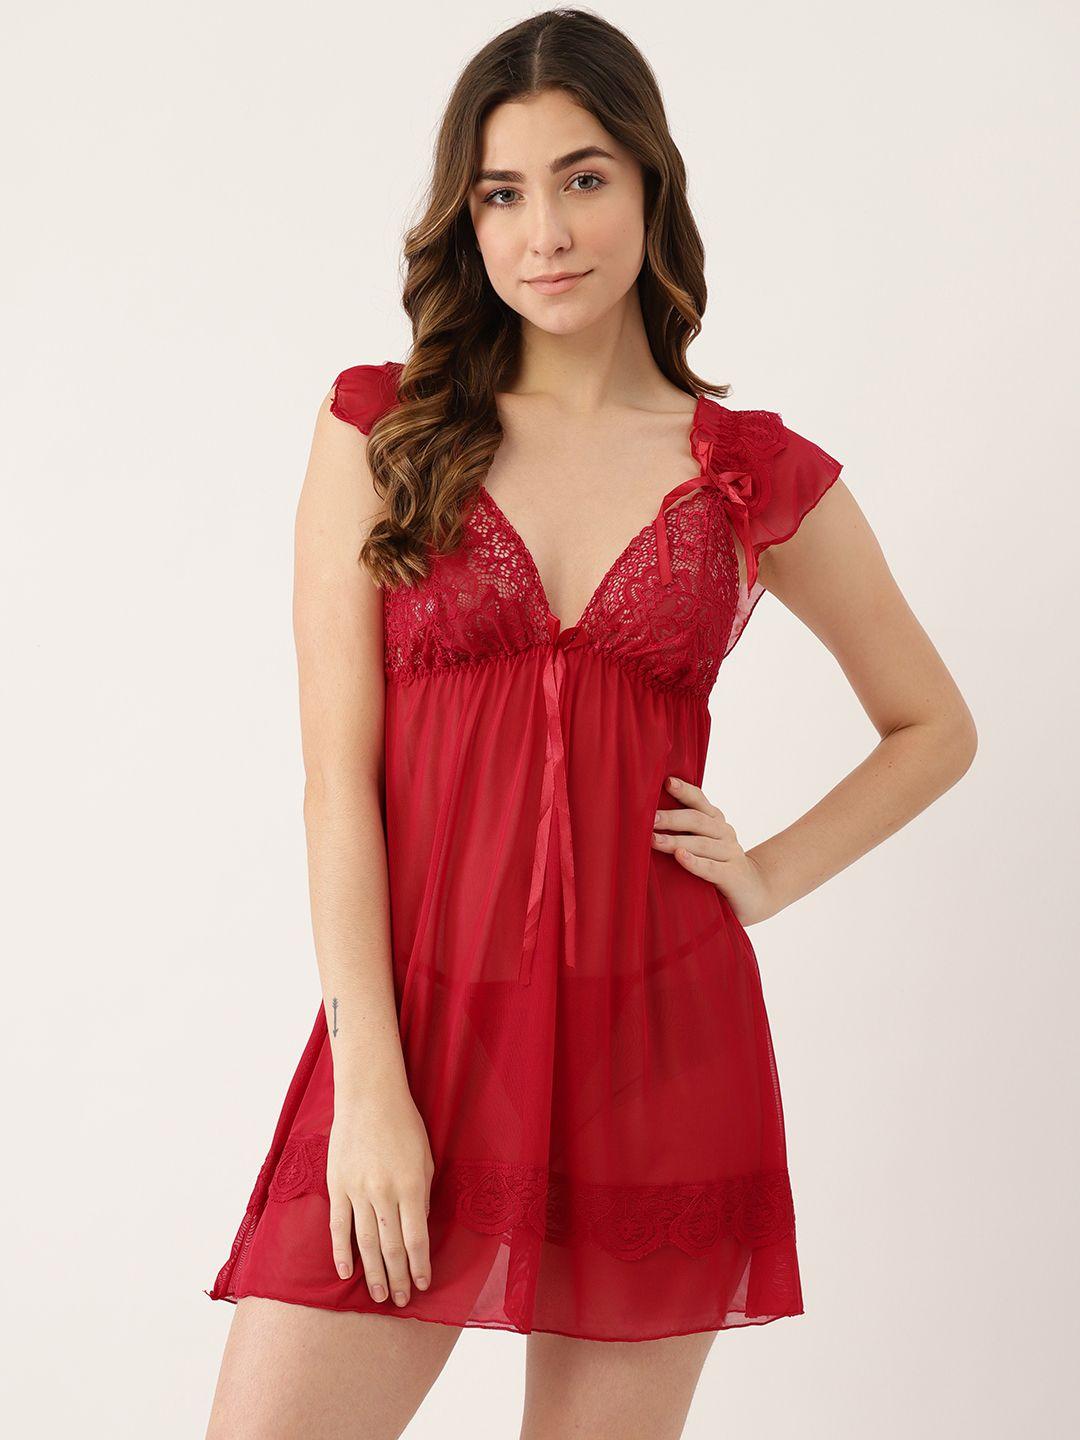 ms lingies women red solid lace detail net baby doll